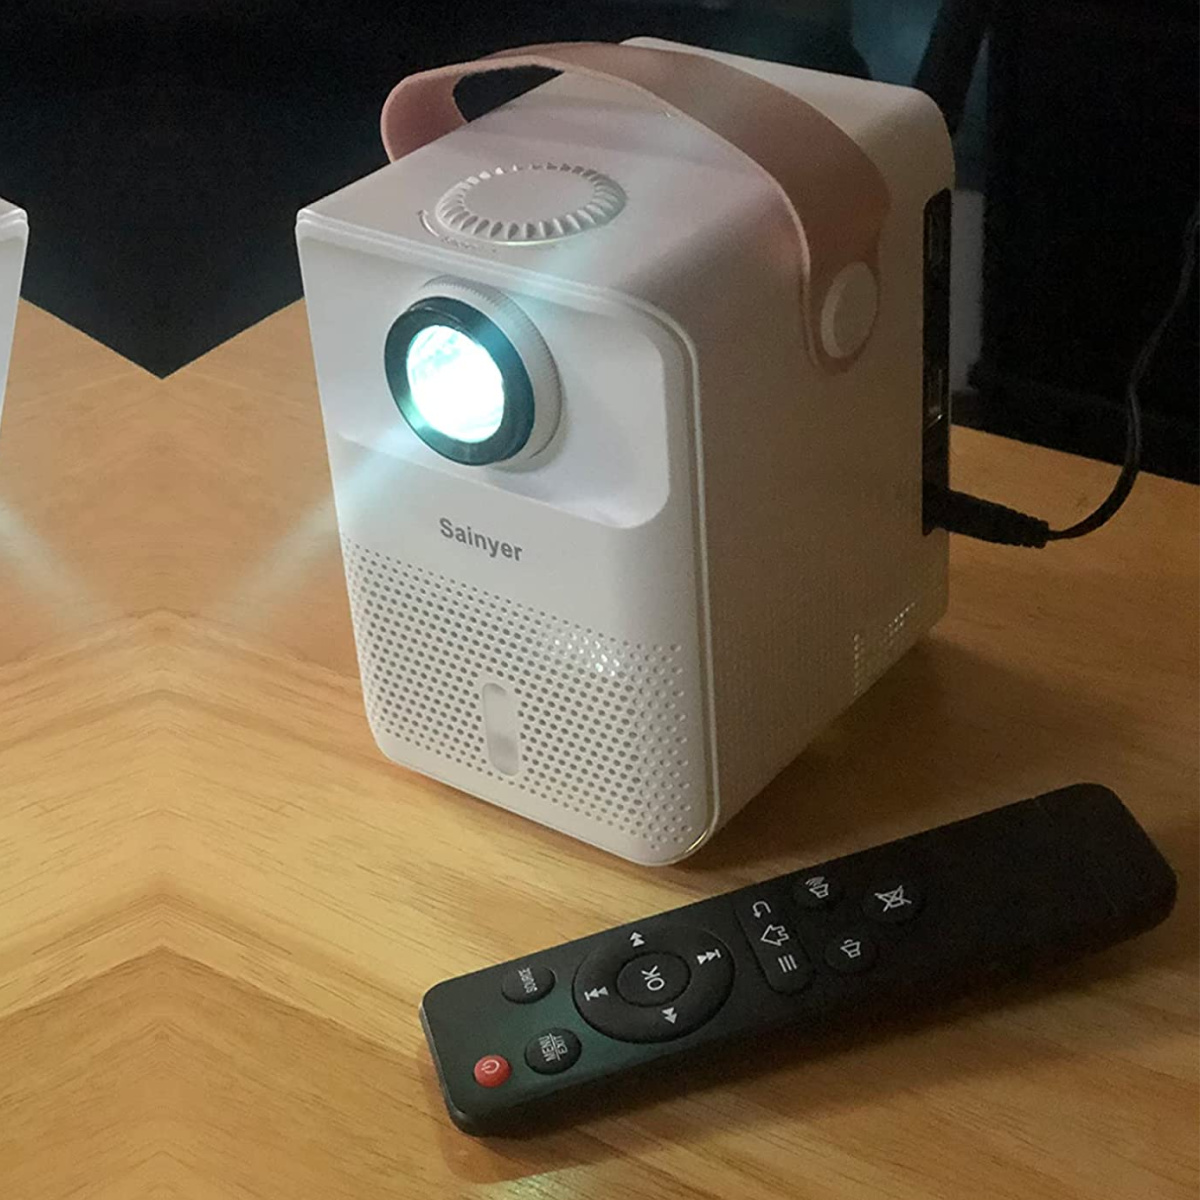 Mini Portable Projector w/ Remote Just $67.93 Shipped on Amazon (Comes w/ Pre-Installed Apps, Like Netflix!)